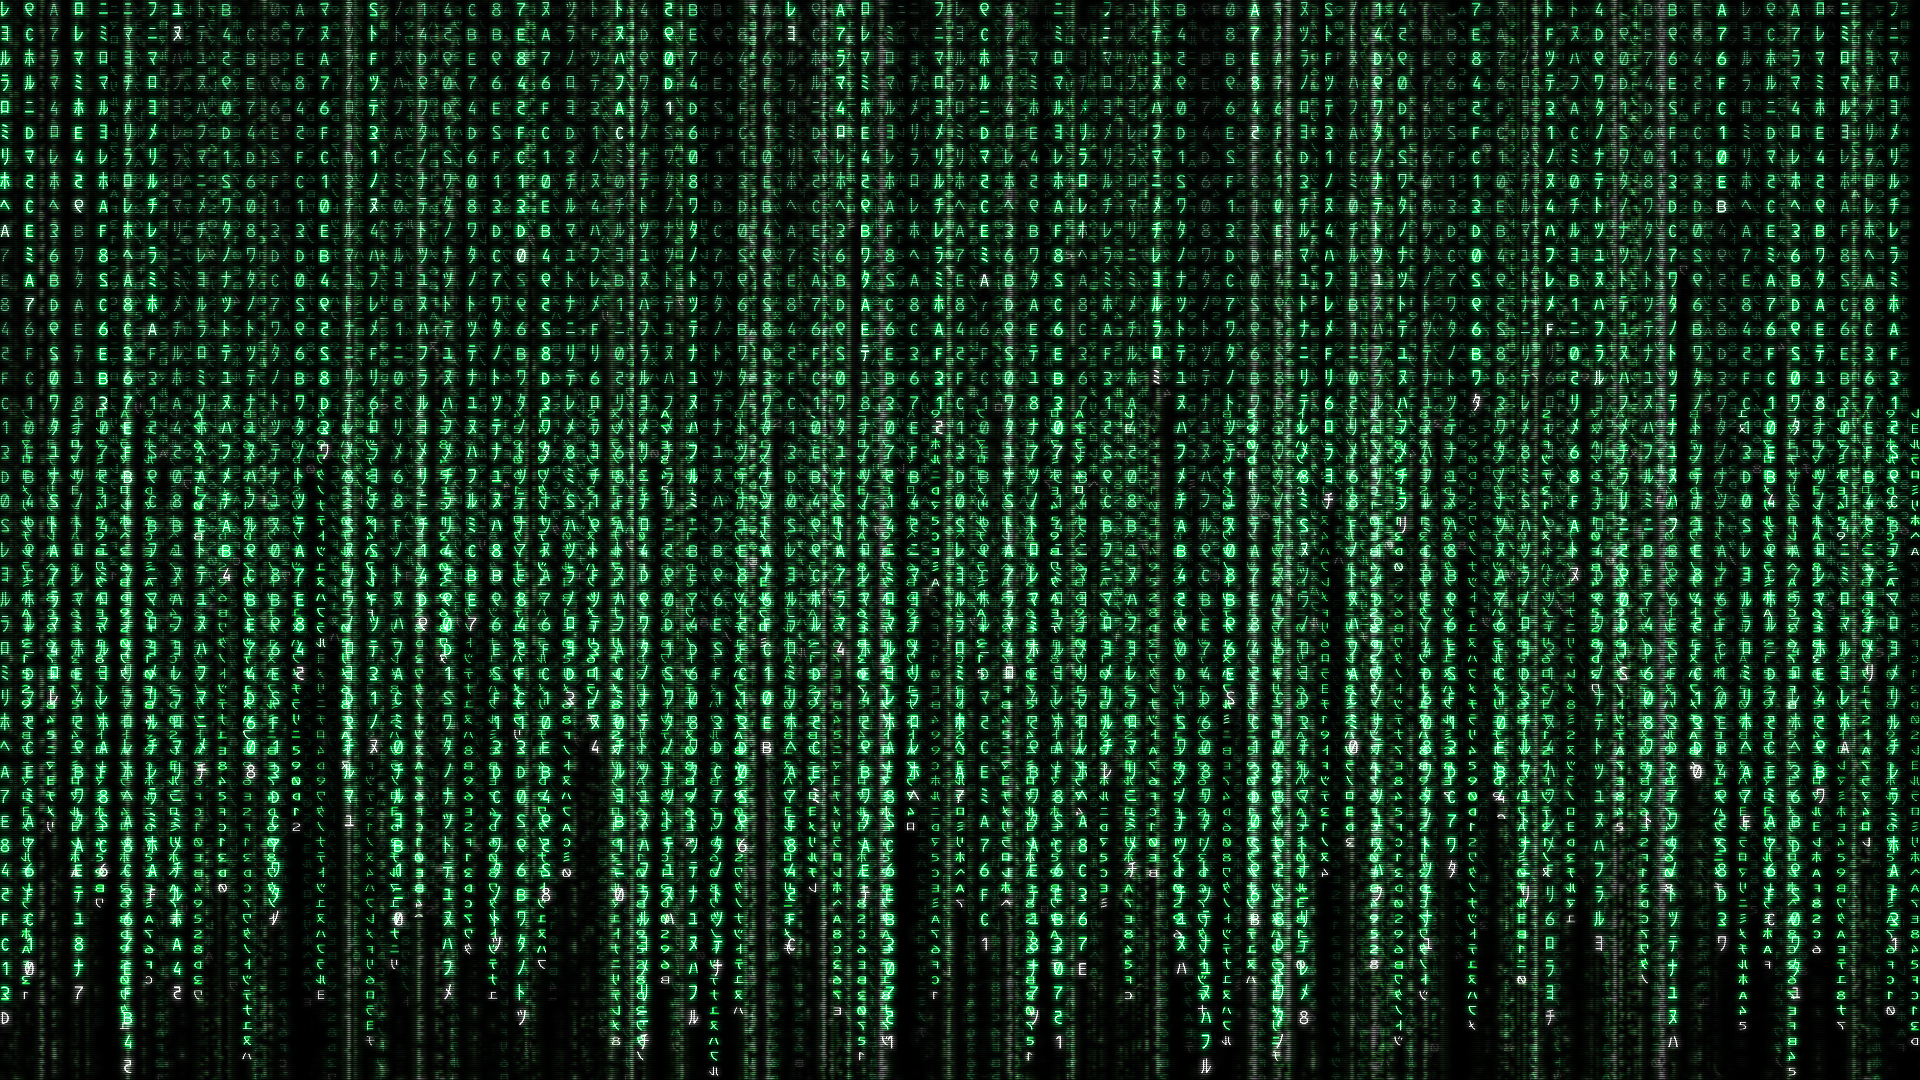 The Matrix Has You Wallpapers 1920x1080